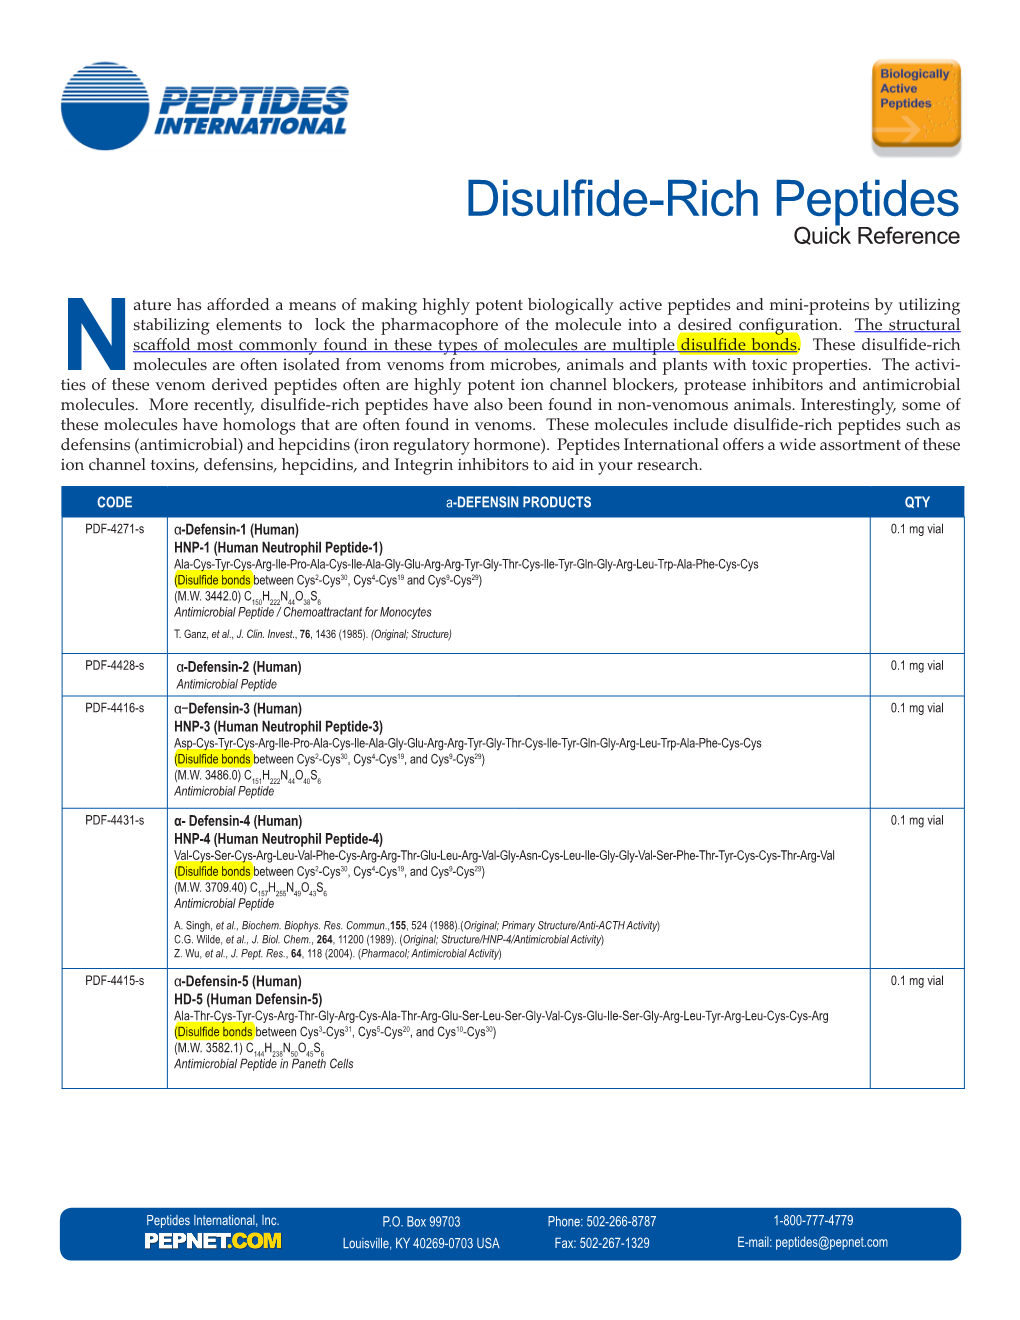 Disulfide-Rich Peptides Quick Reference